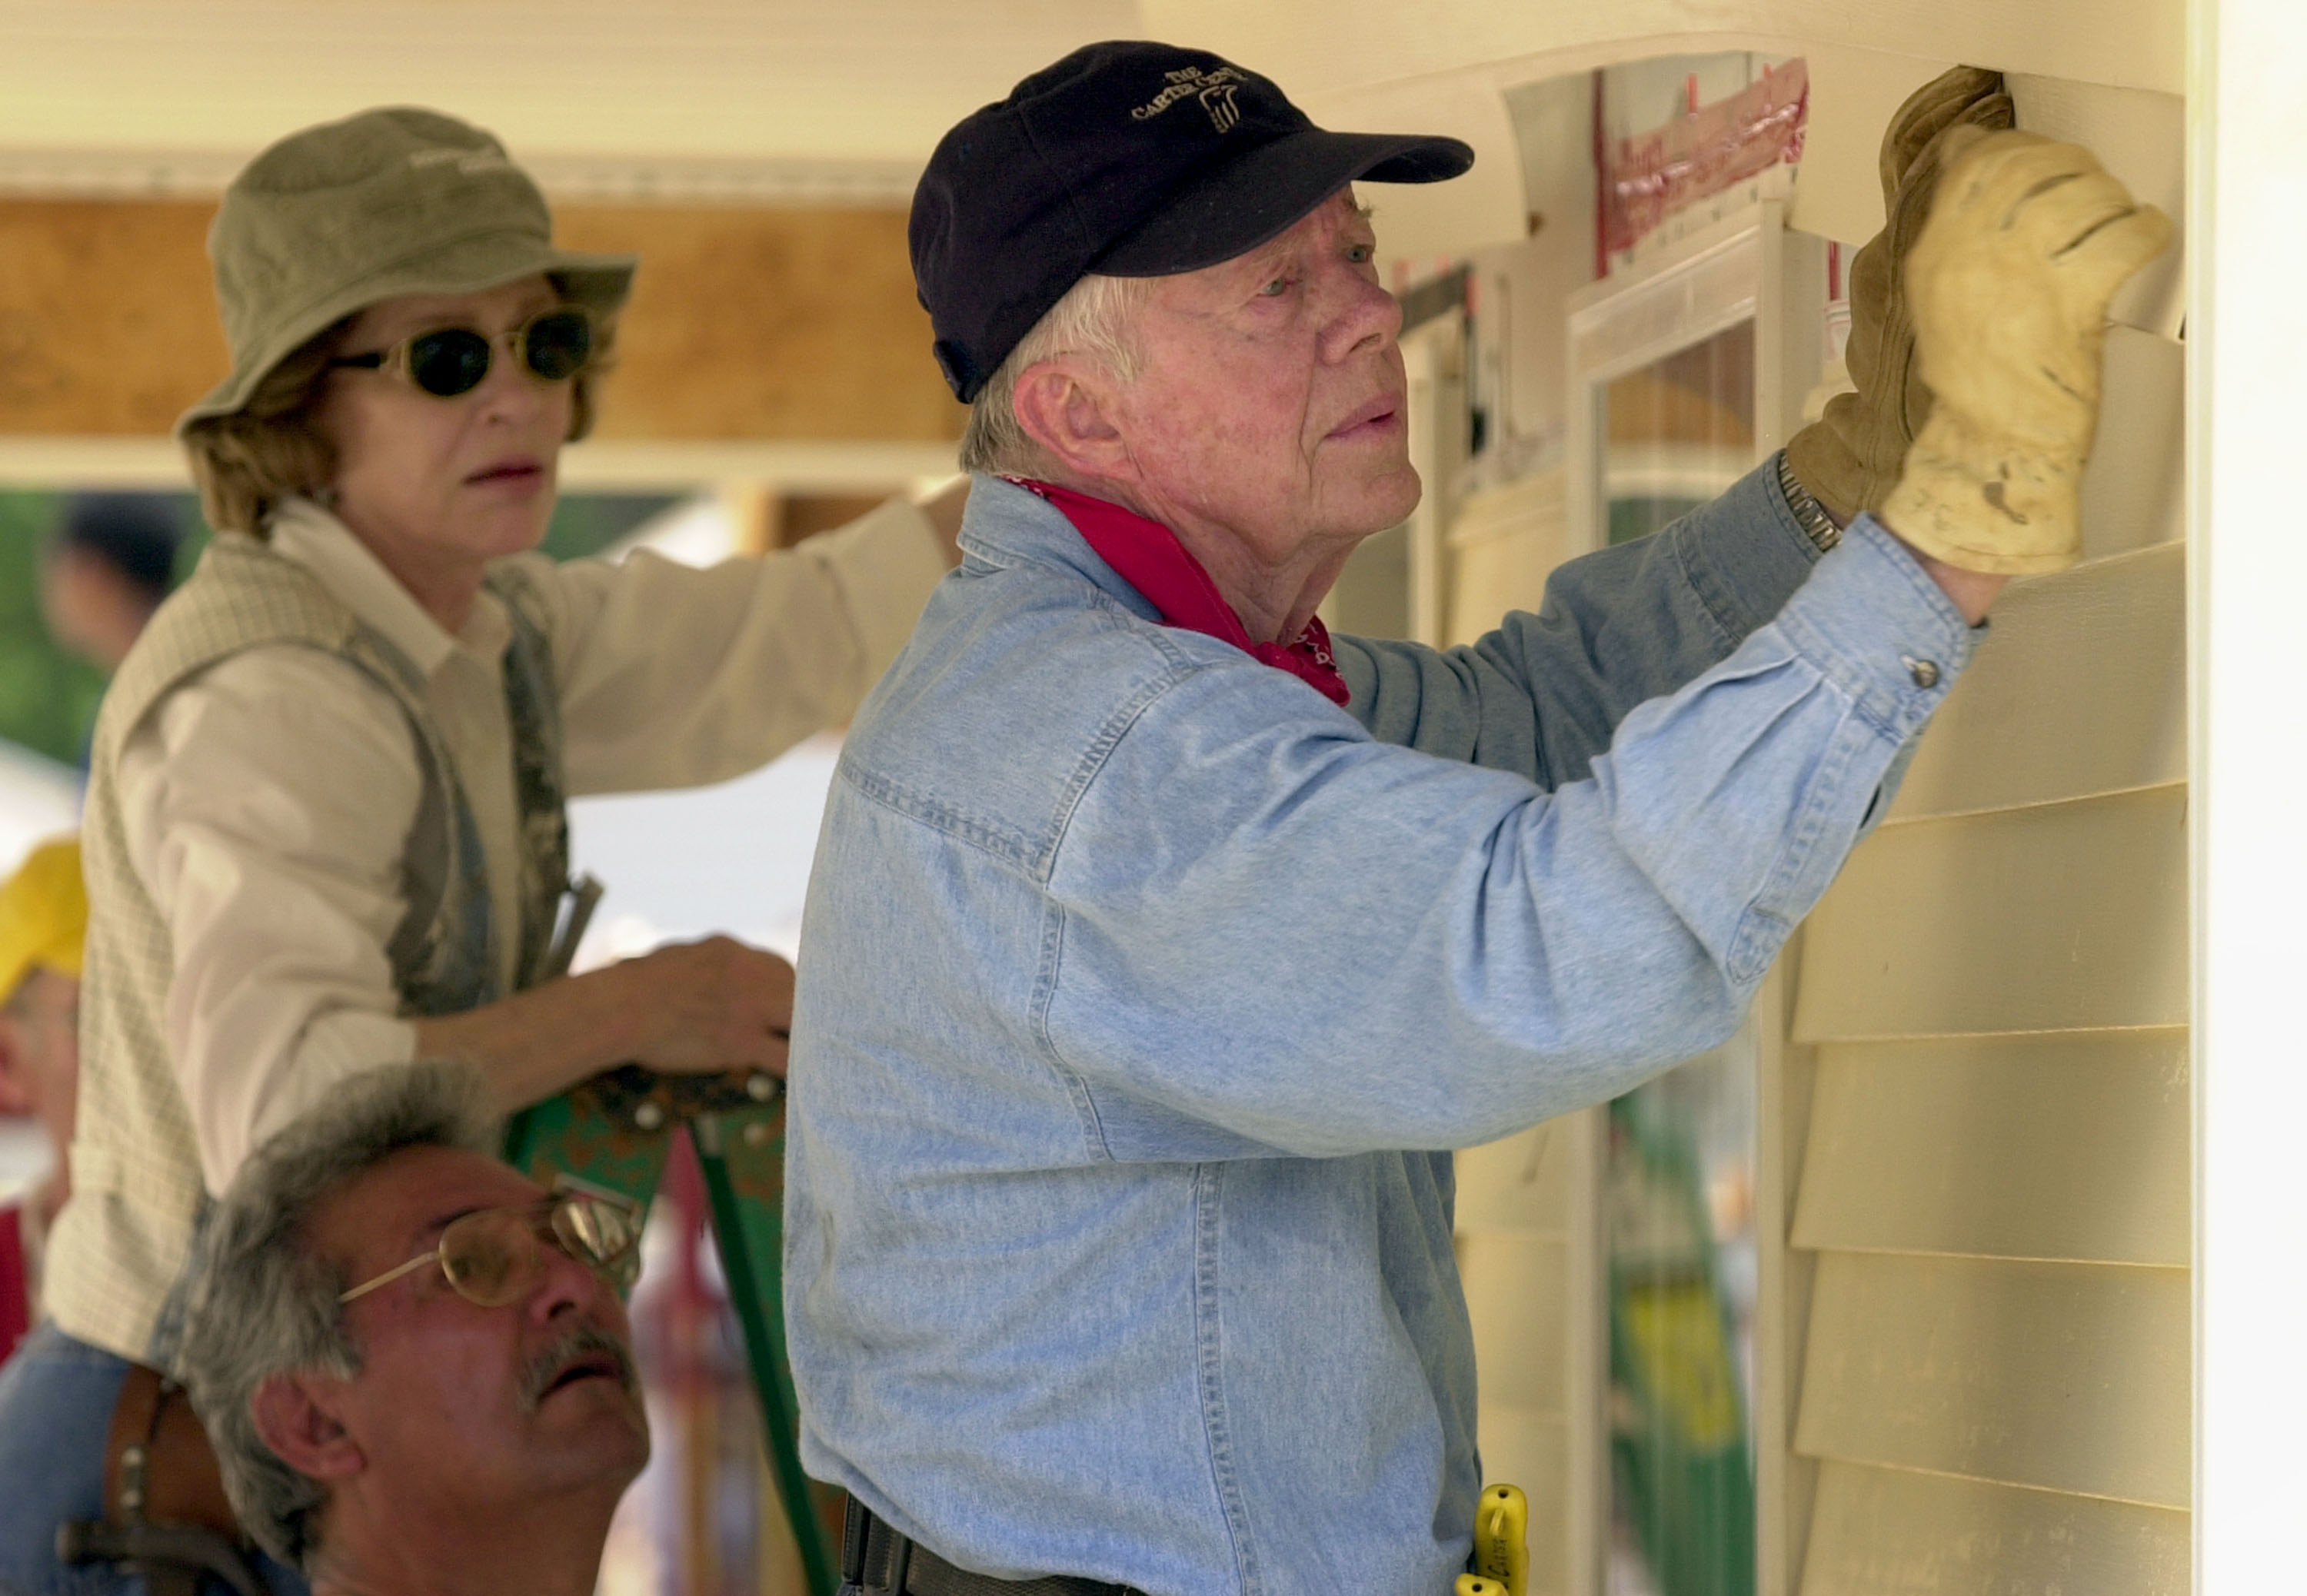 Rosalynn and Jimmy Carter working on a house for Habitat for Humanity homes in LaGrange, 2003. | Source: Getty Images